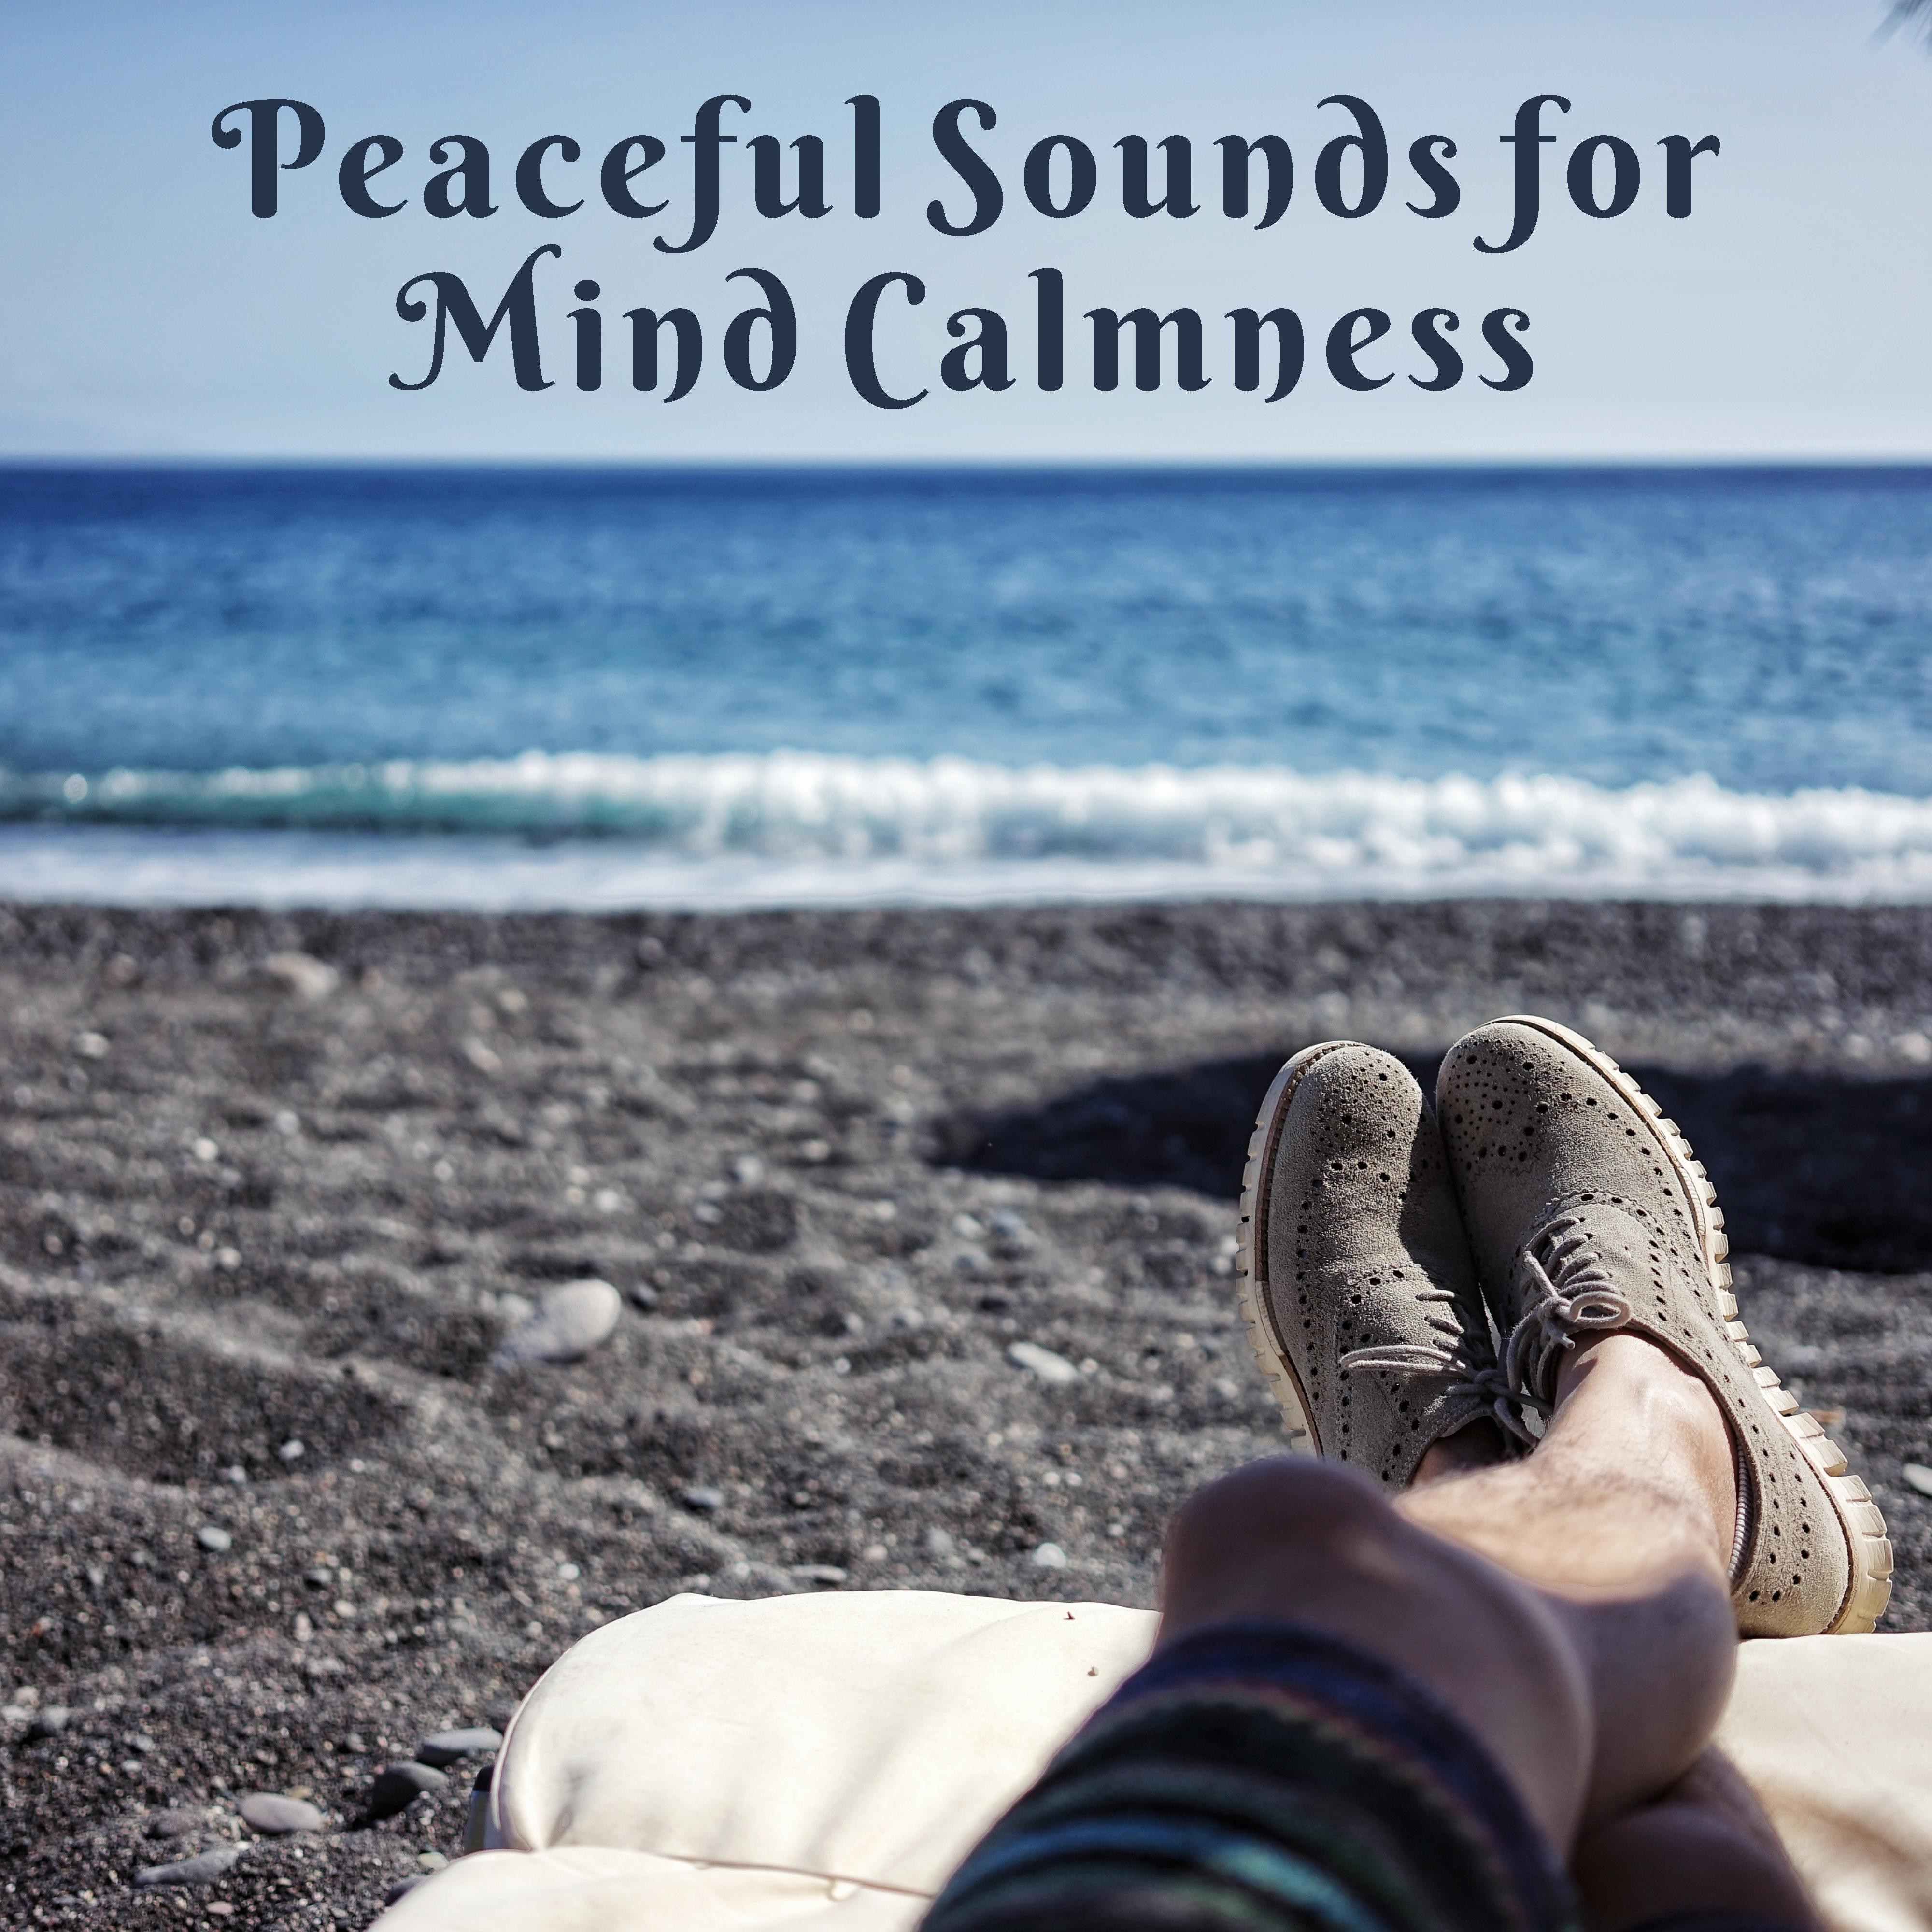 Peaceful Sounds for Mind Calmness – Rest a Bit, Relax Yourself, Easy Listening, New Age Relaxation, Stress Relief